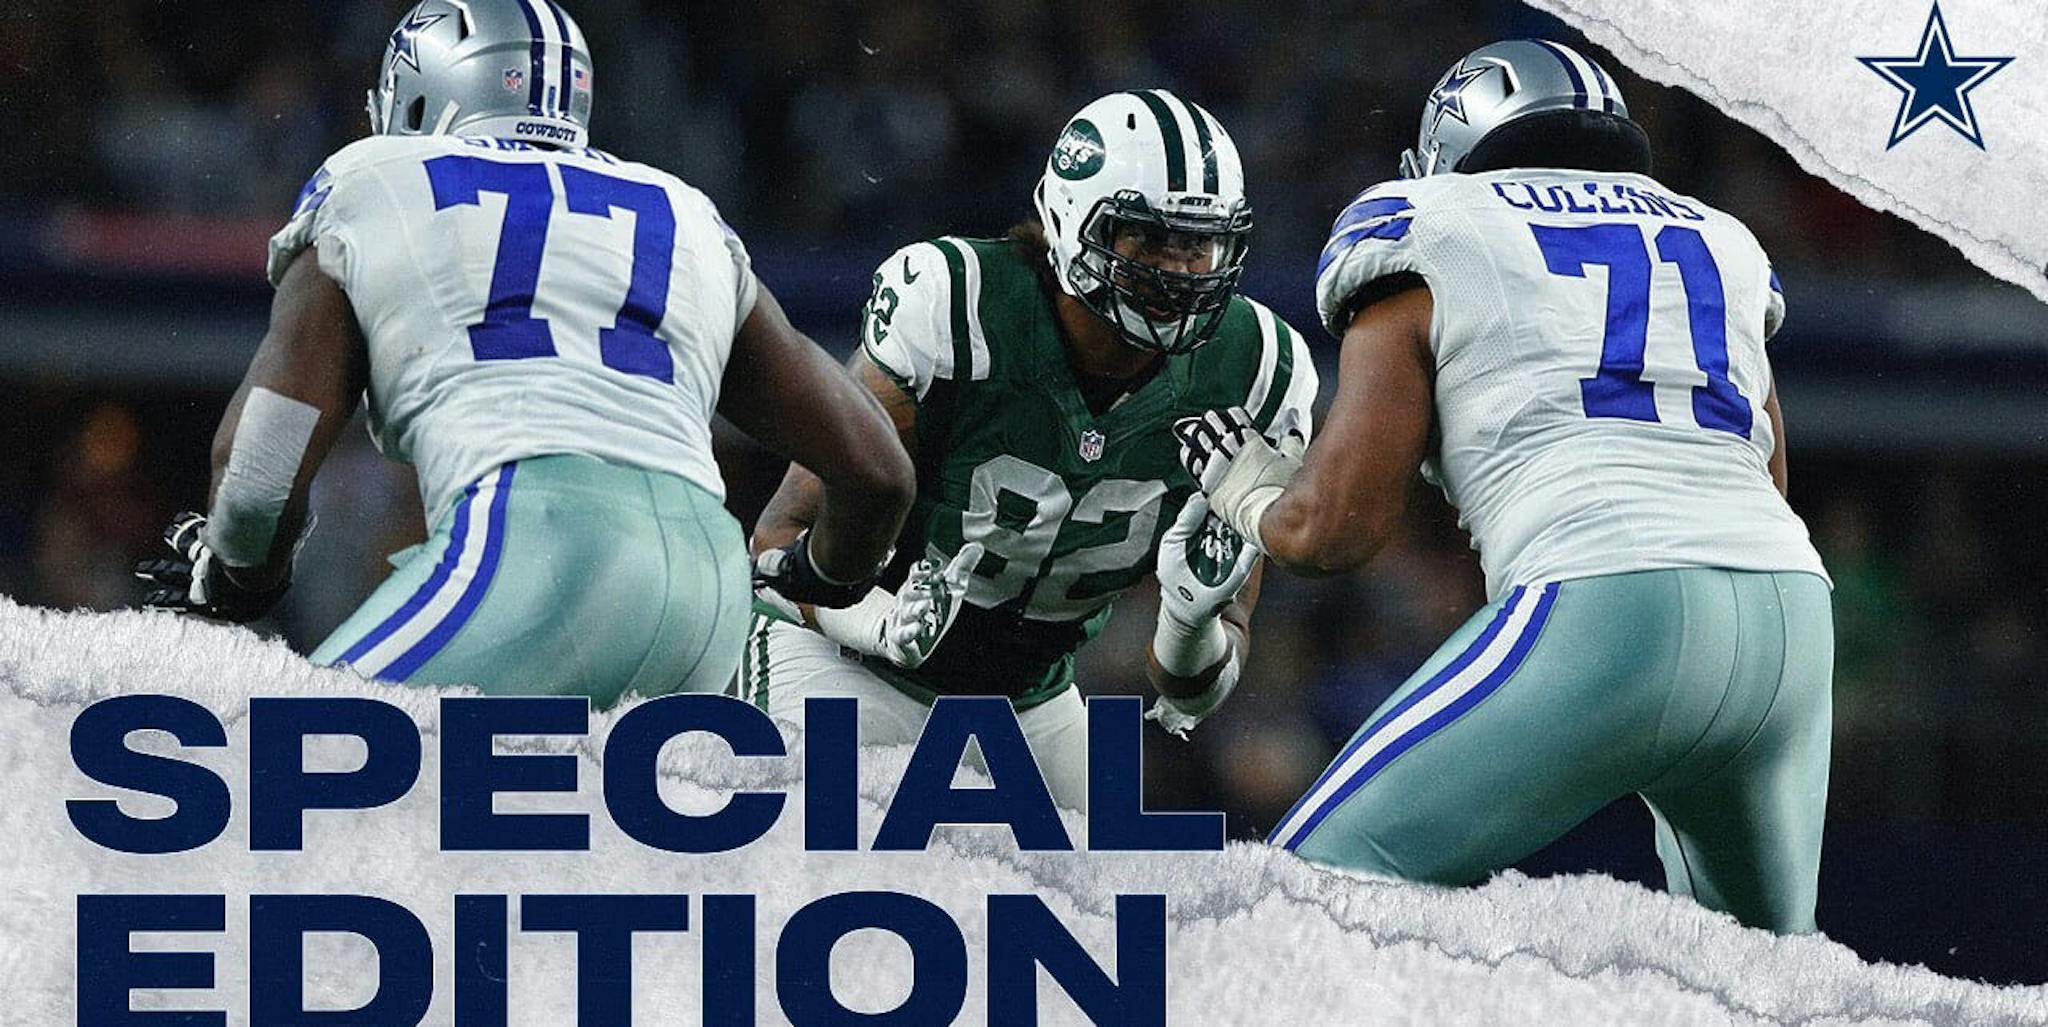 Cowboys vs. Jets Live Stream How to Watch the NFL Online